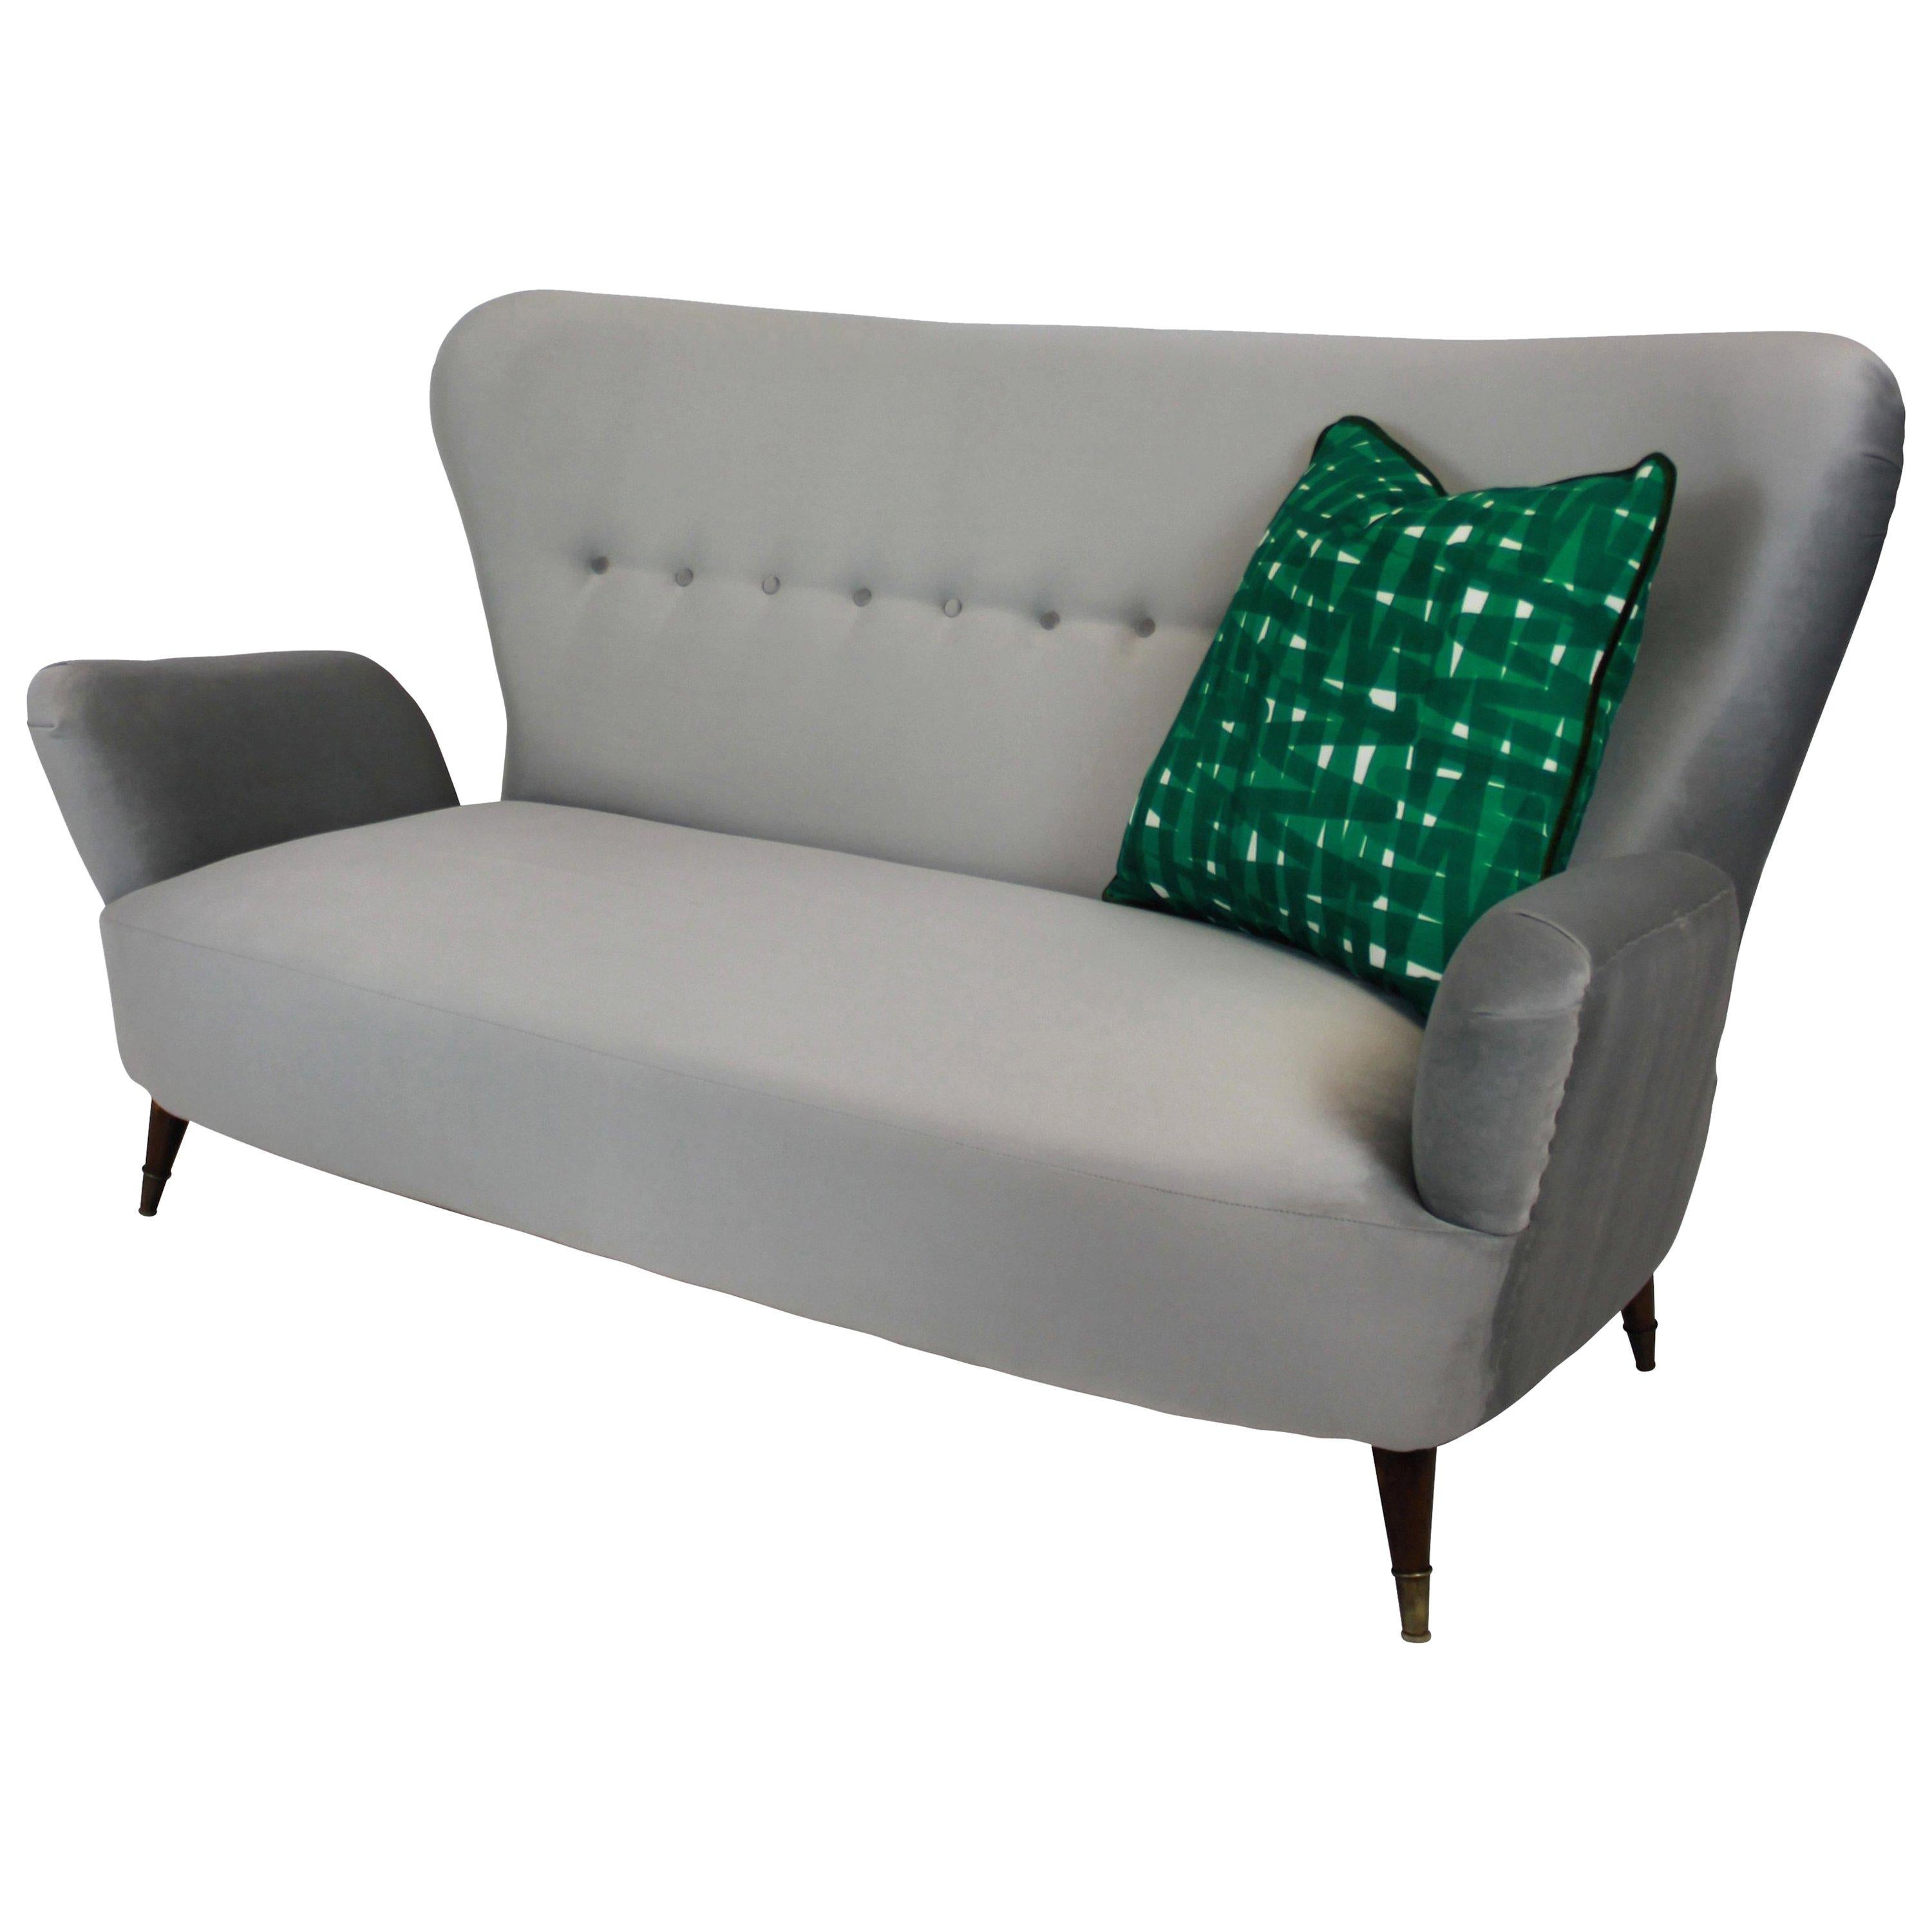 A stylish Italian sofa of good shape with tapering legs and brass sabot by Emilia Sala and Giorgio Madini (Designer), Fratelli Galimberti Cantù (Manufacturer). Newly upholstered in silver grey velvet, with seat cushions removed for better